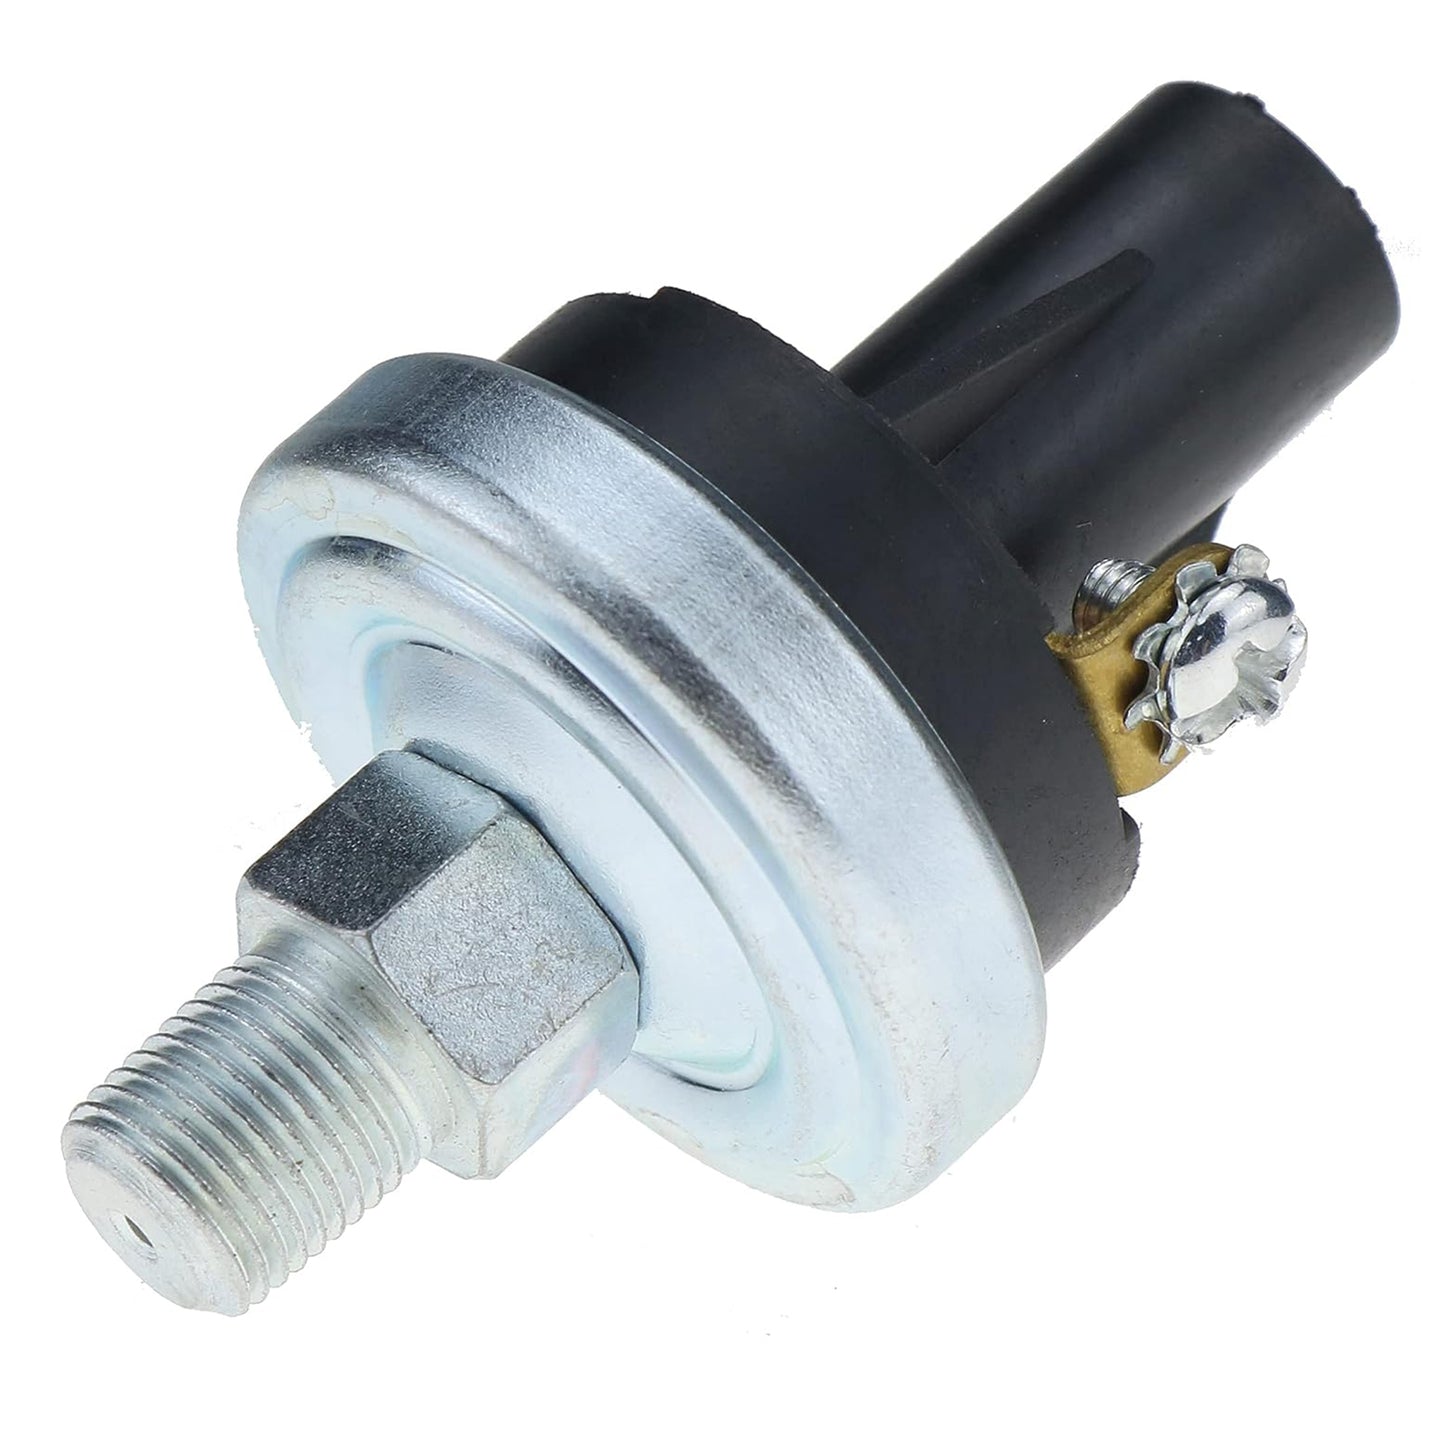 6671062 Hydraulic Charge Pressure Switch Compatible with Bobcat 443 540 542 543 641